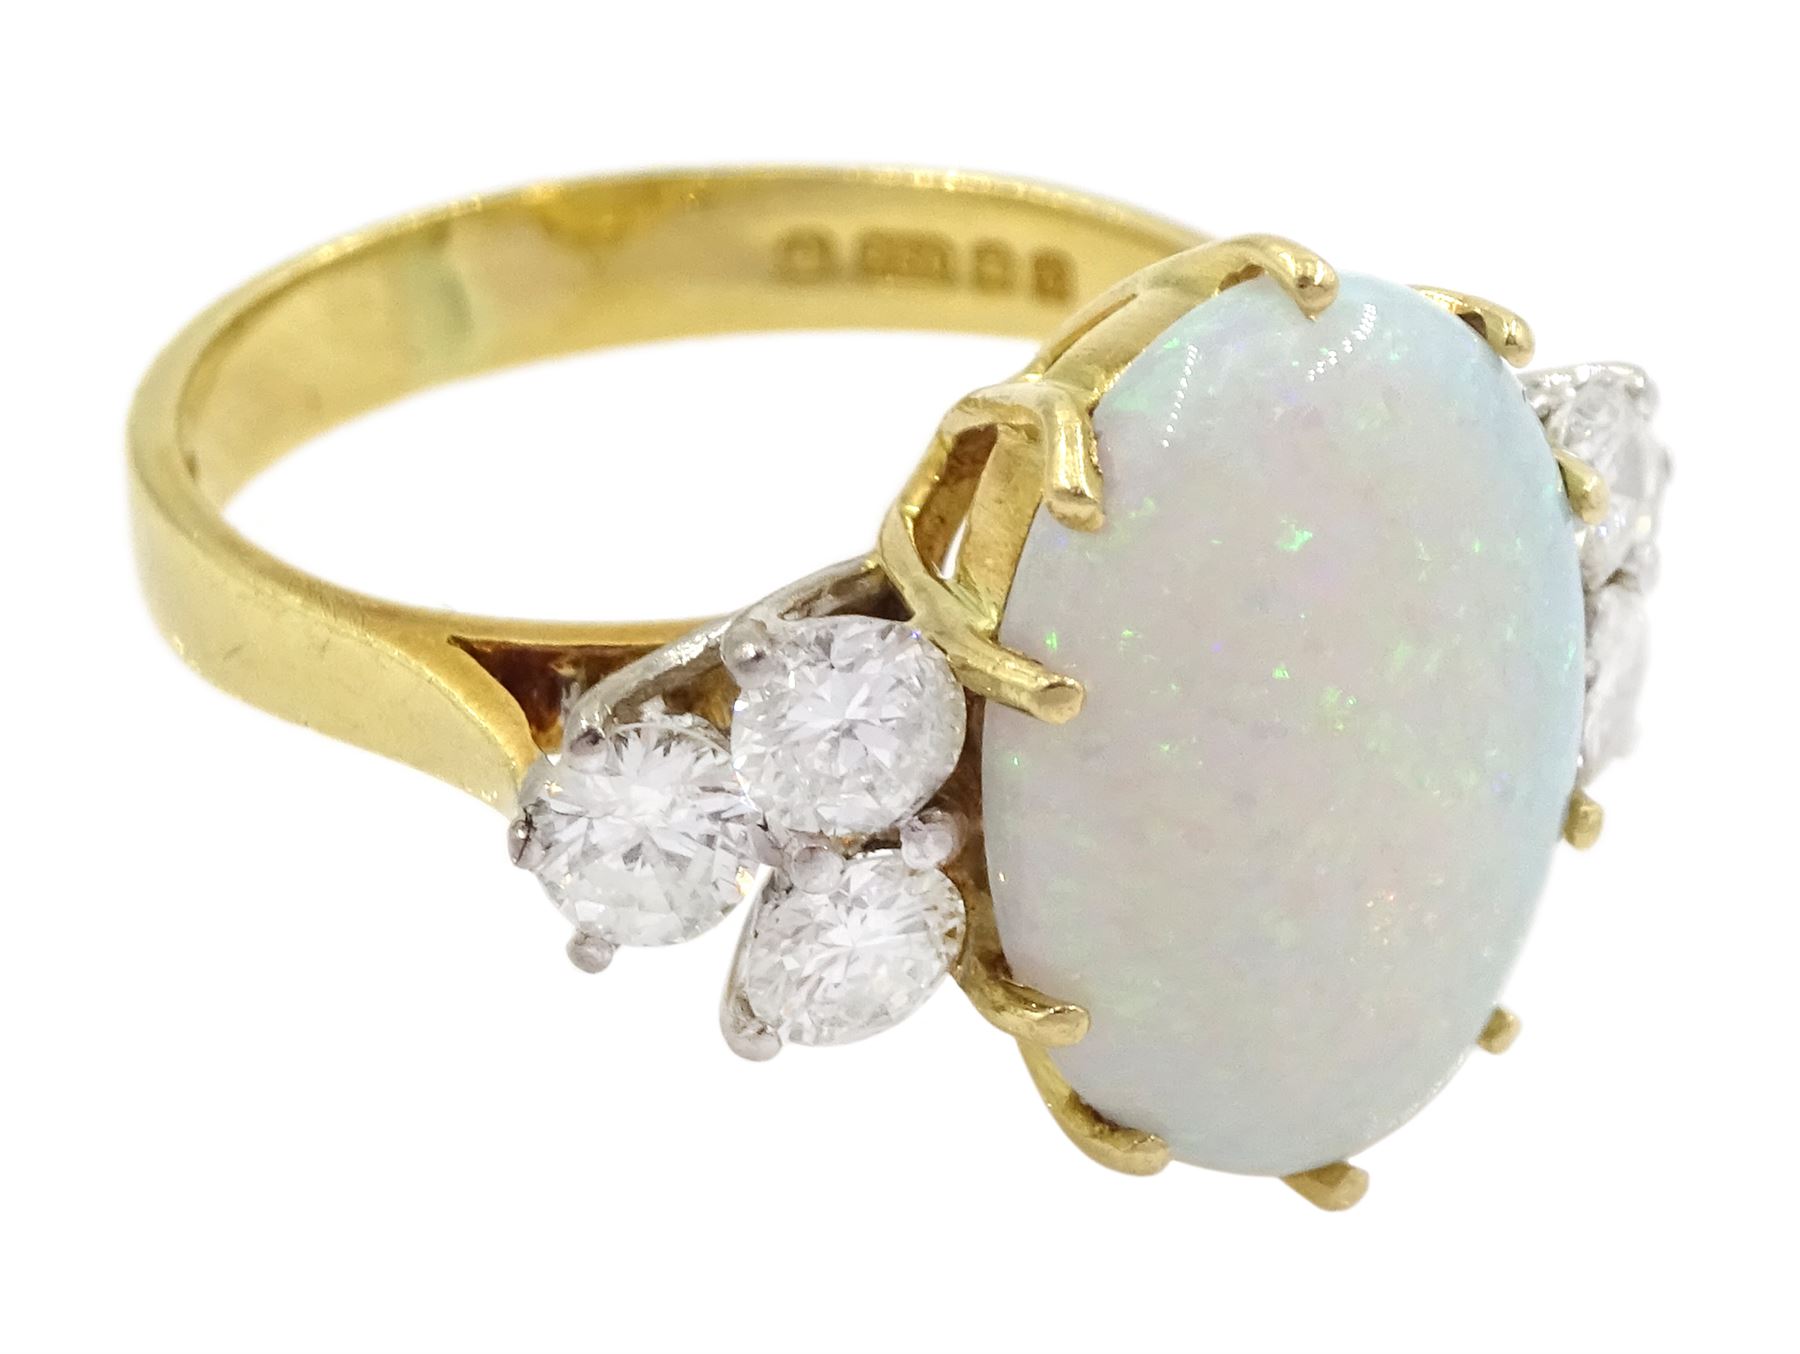 18ct gold opal and six stone round brilliant cut diamond ring - Image 3 of 4